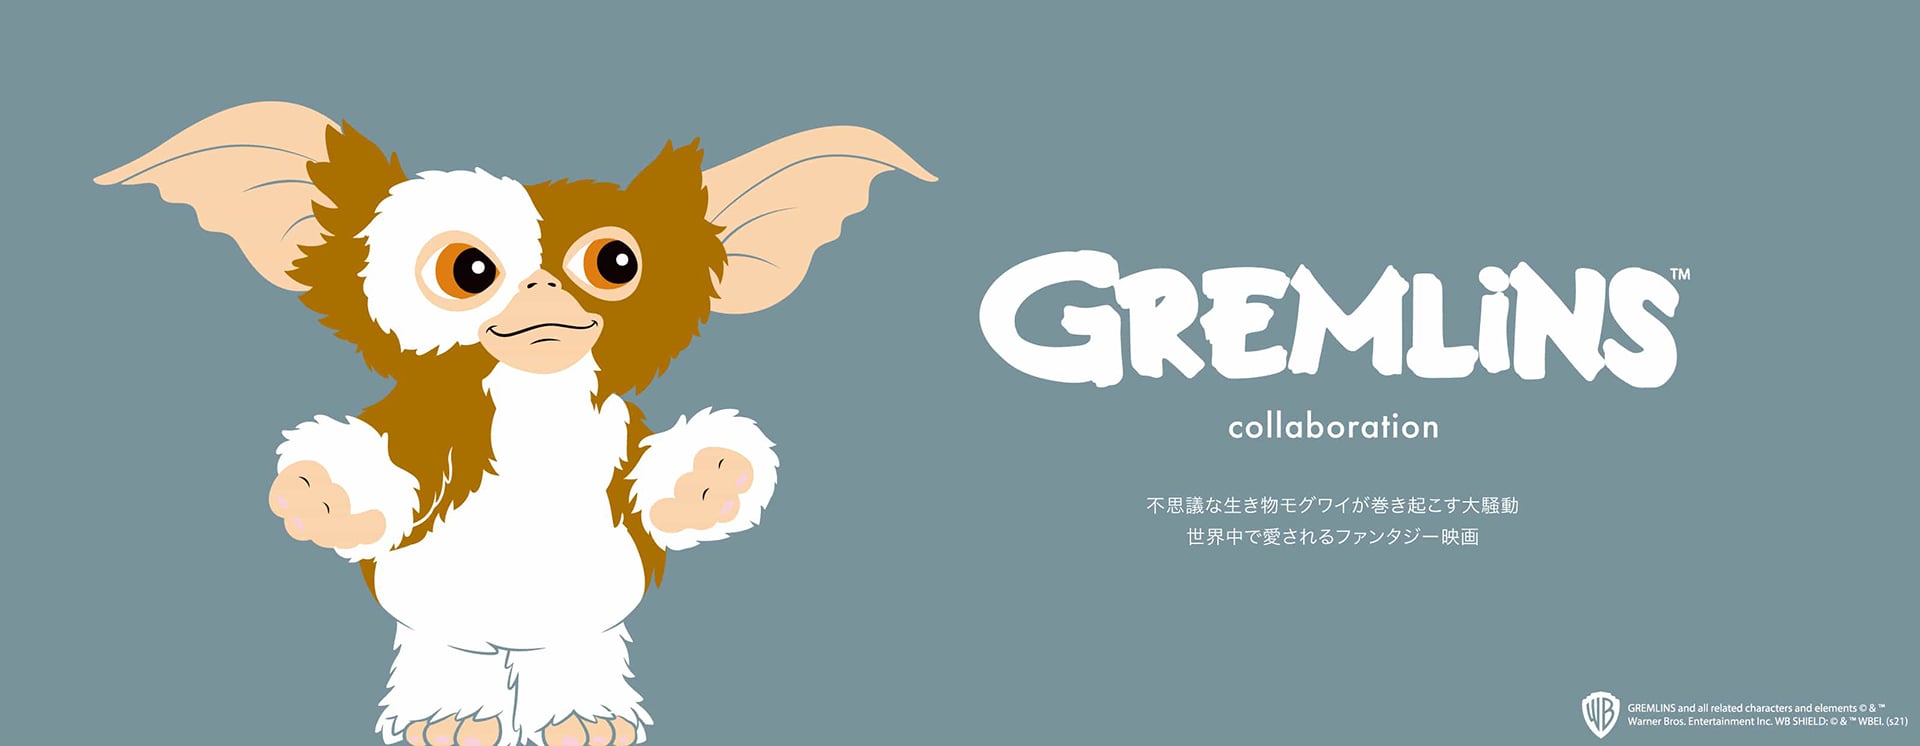 Gremlins is a 1984 American comedy horror film directed by Joe Dante and released by Warner Bros.[ssorder:-20220509]